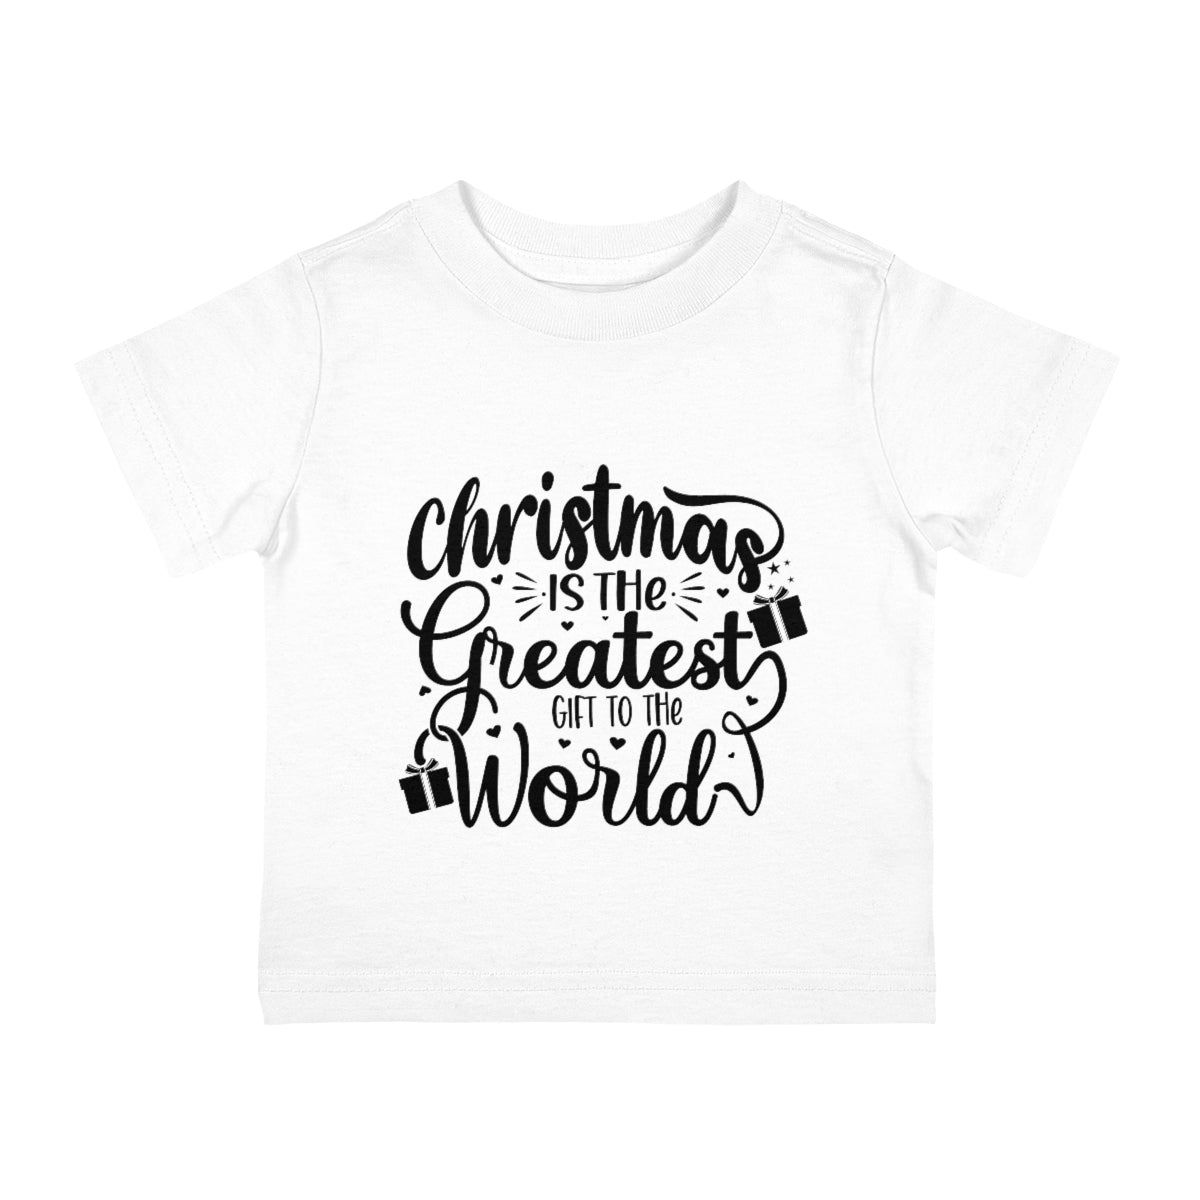 Greatest gift to the world Christmas Tee, Baby Tee, Infant Tee, Christmas Baby Tee